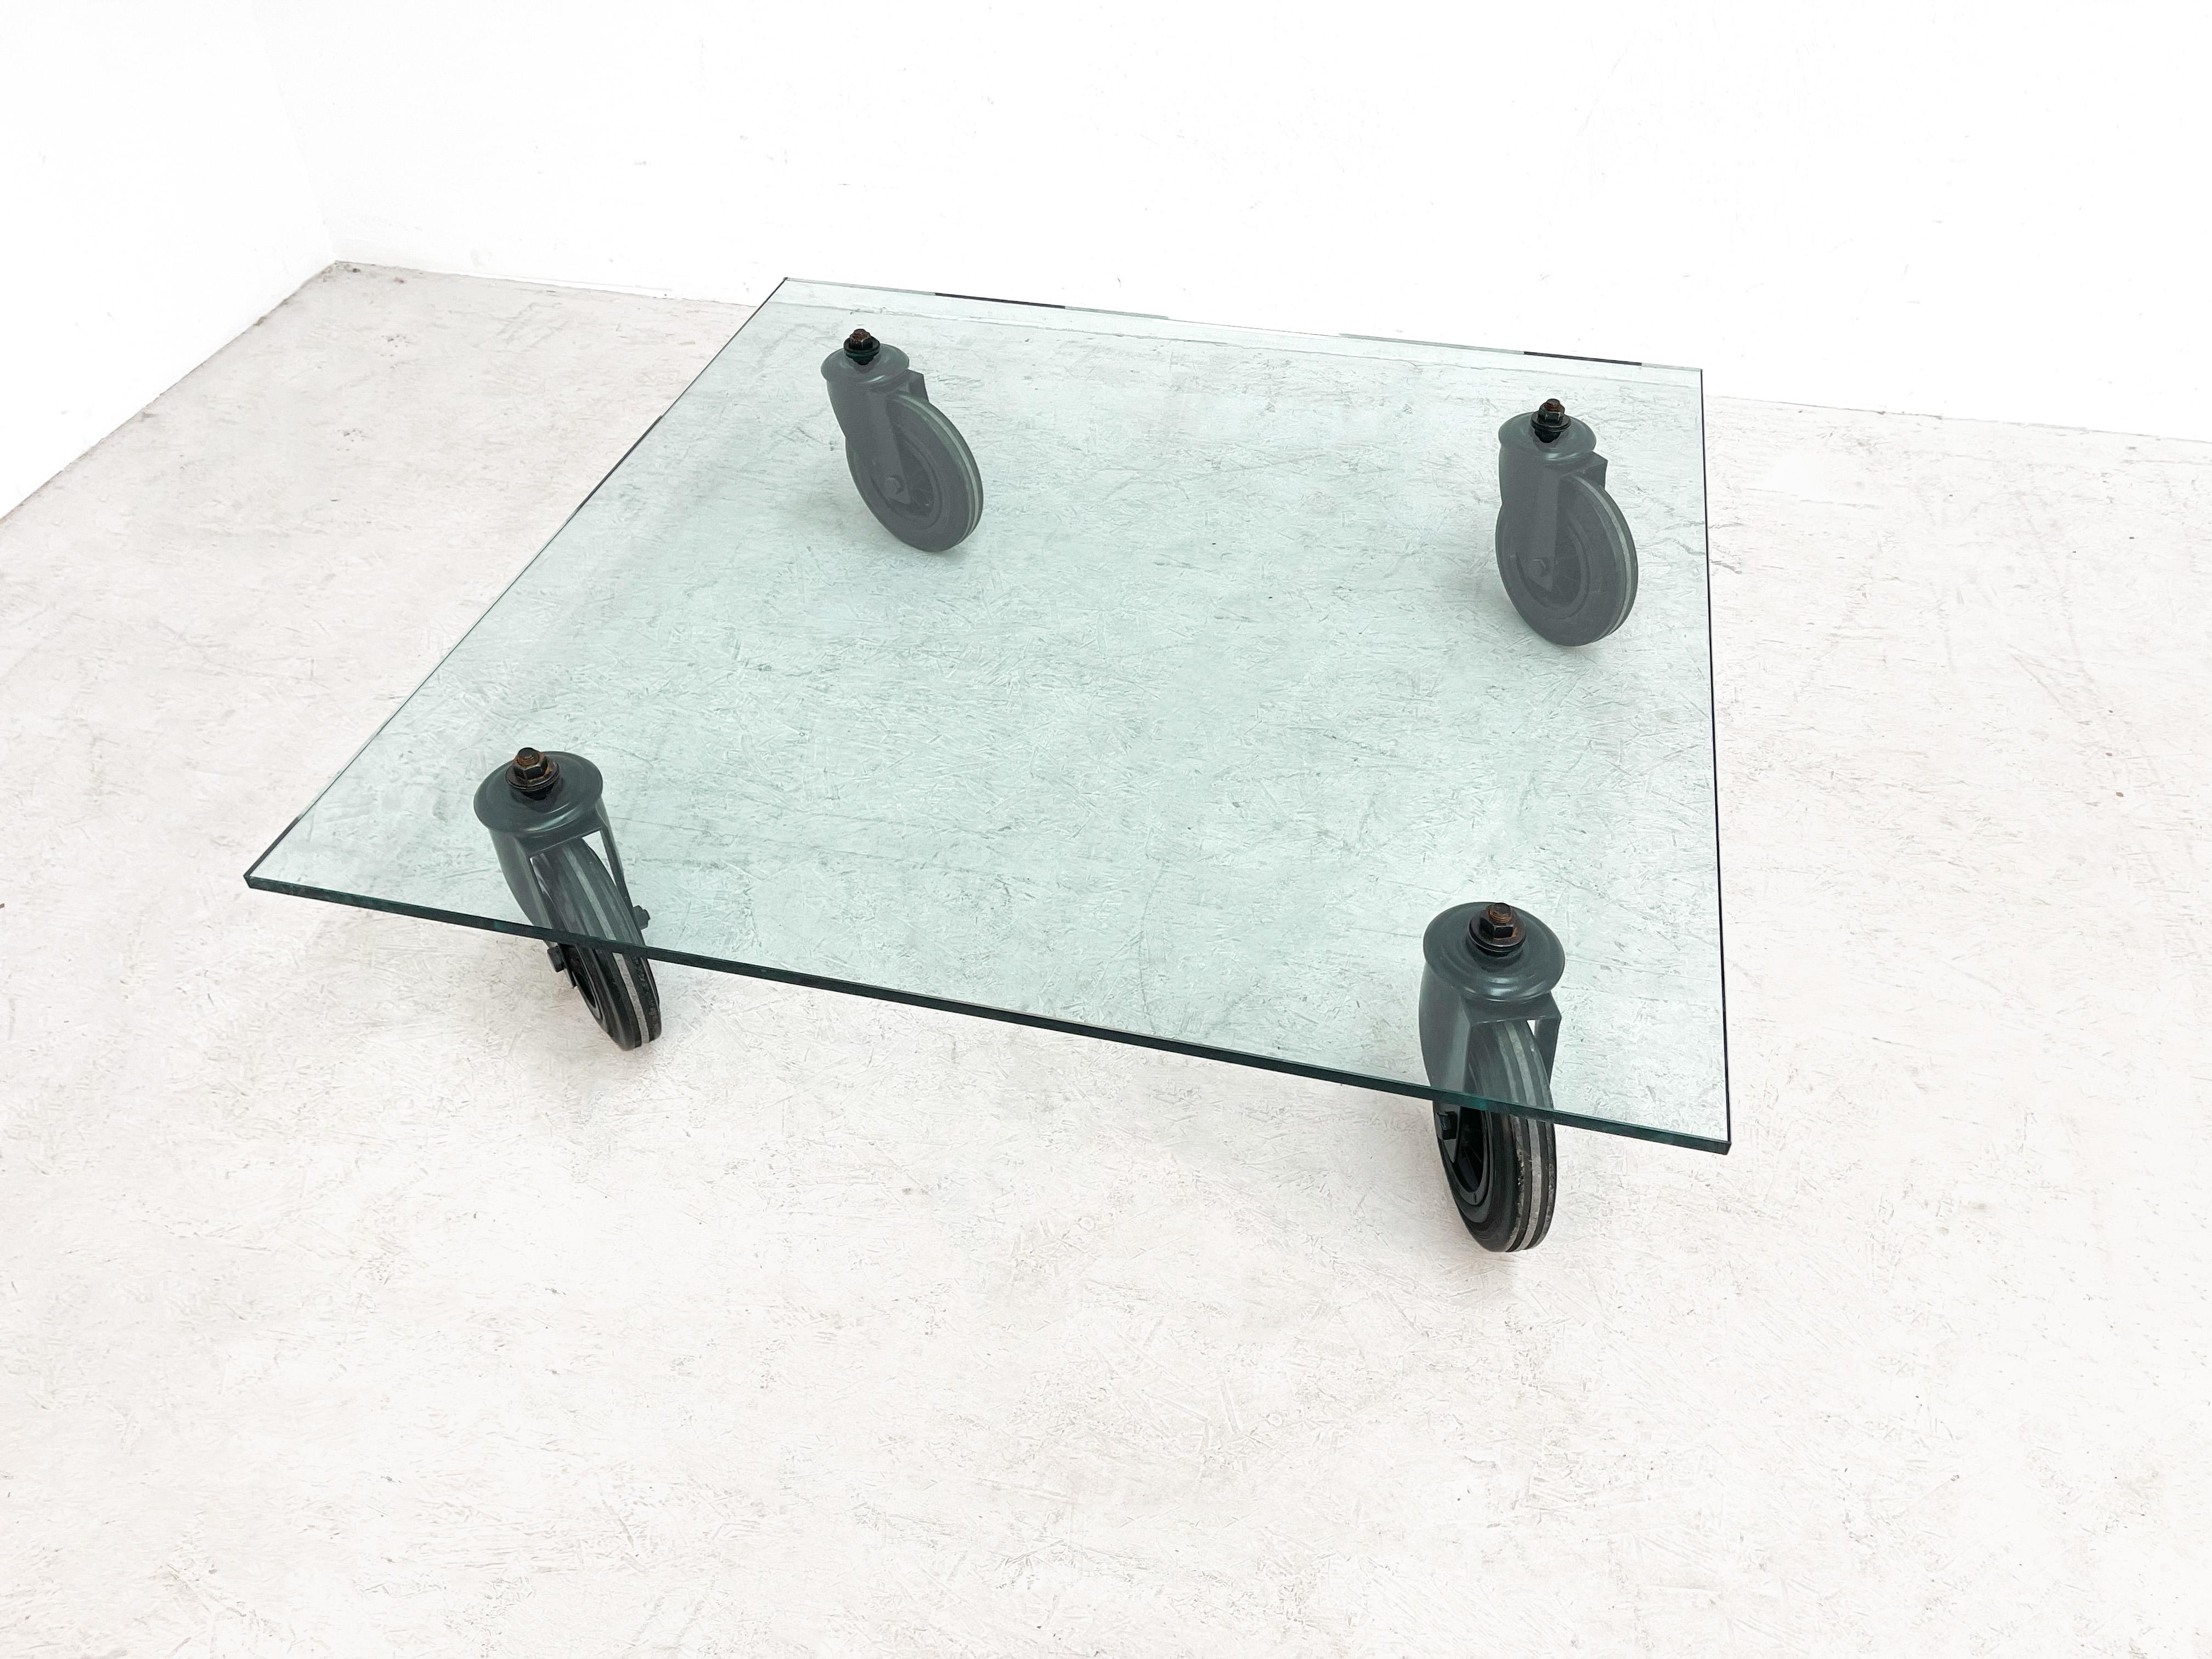 Very elegant coffee table by 1 of most famous and iconic Italian designers Gae Aulenti. Gae Aulenti designed this table for Fontana Arte in the 80s. The design behind this piece of iconic design is based on a trolley she used to transport glass in